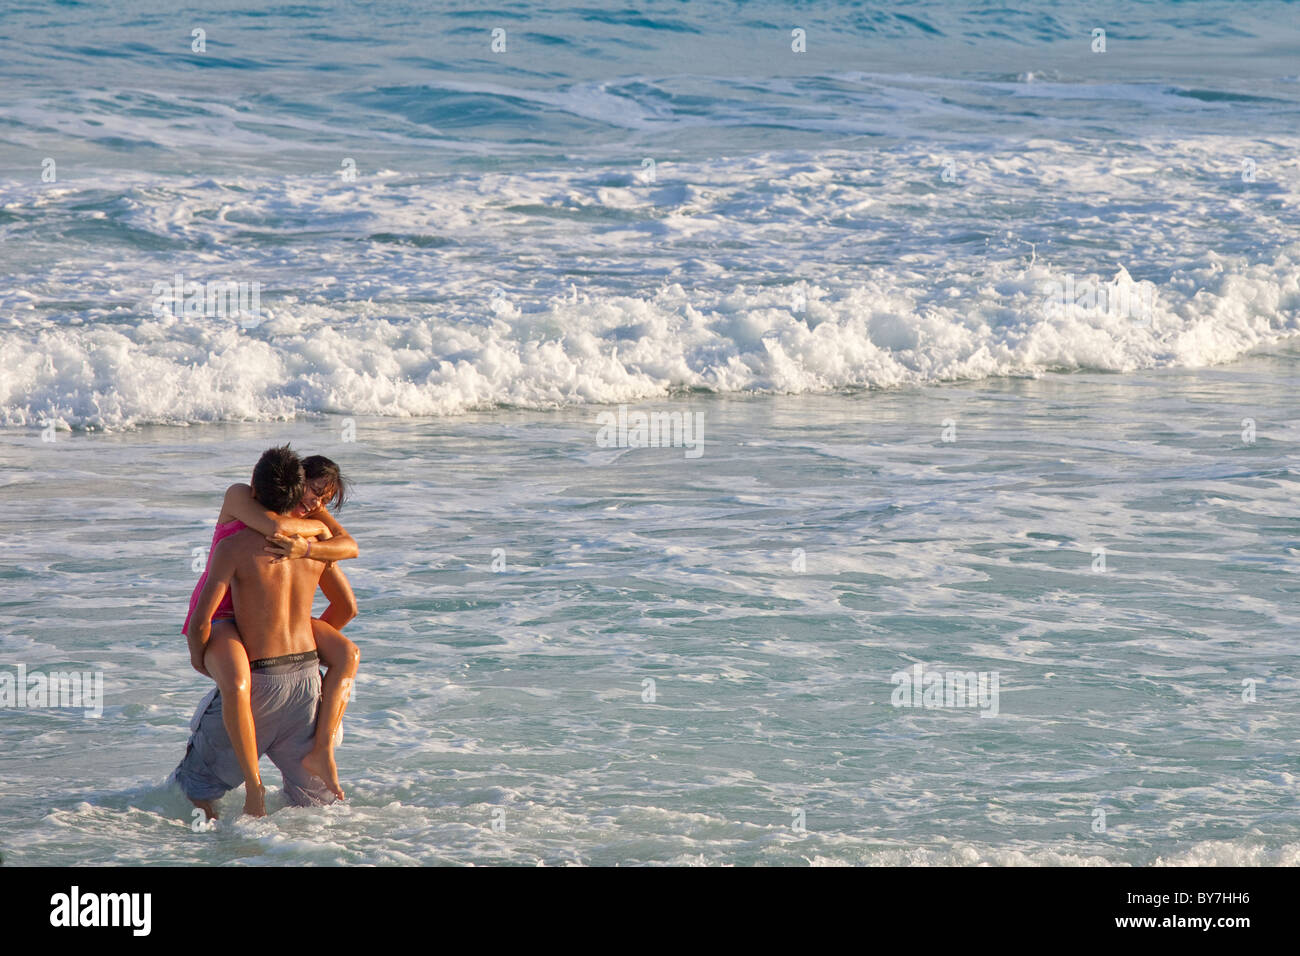 Cancun Mexico Beach Couple High Resolution Stock Photography And Images Alamy